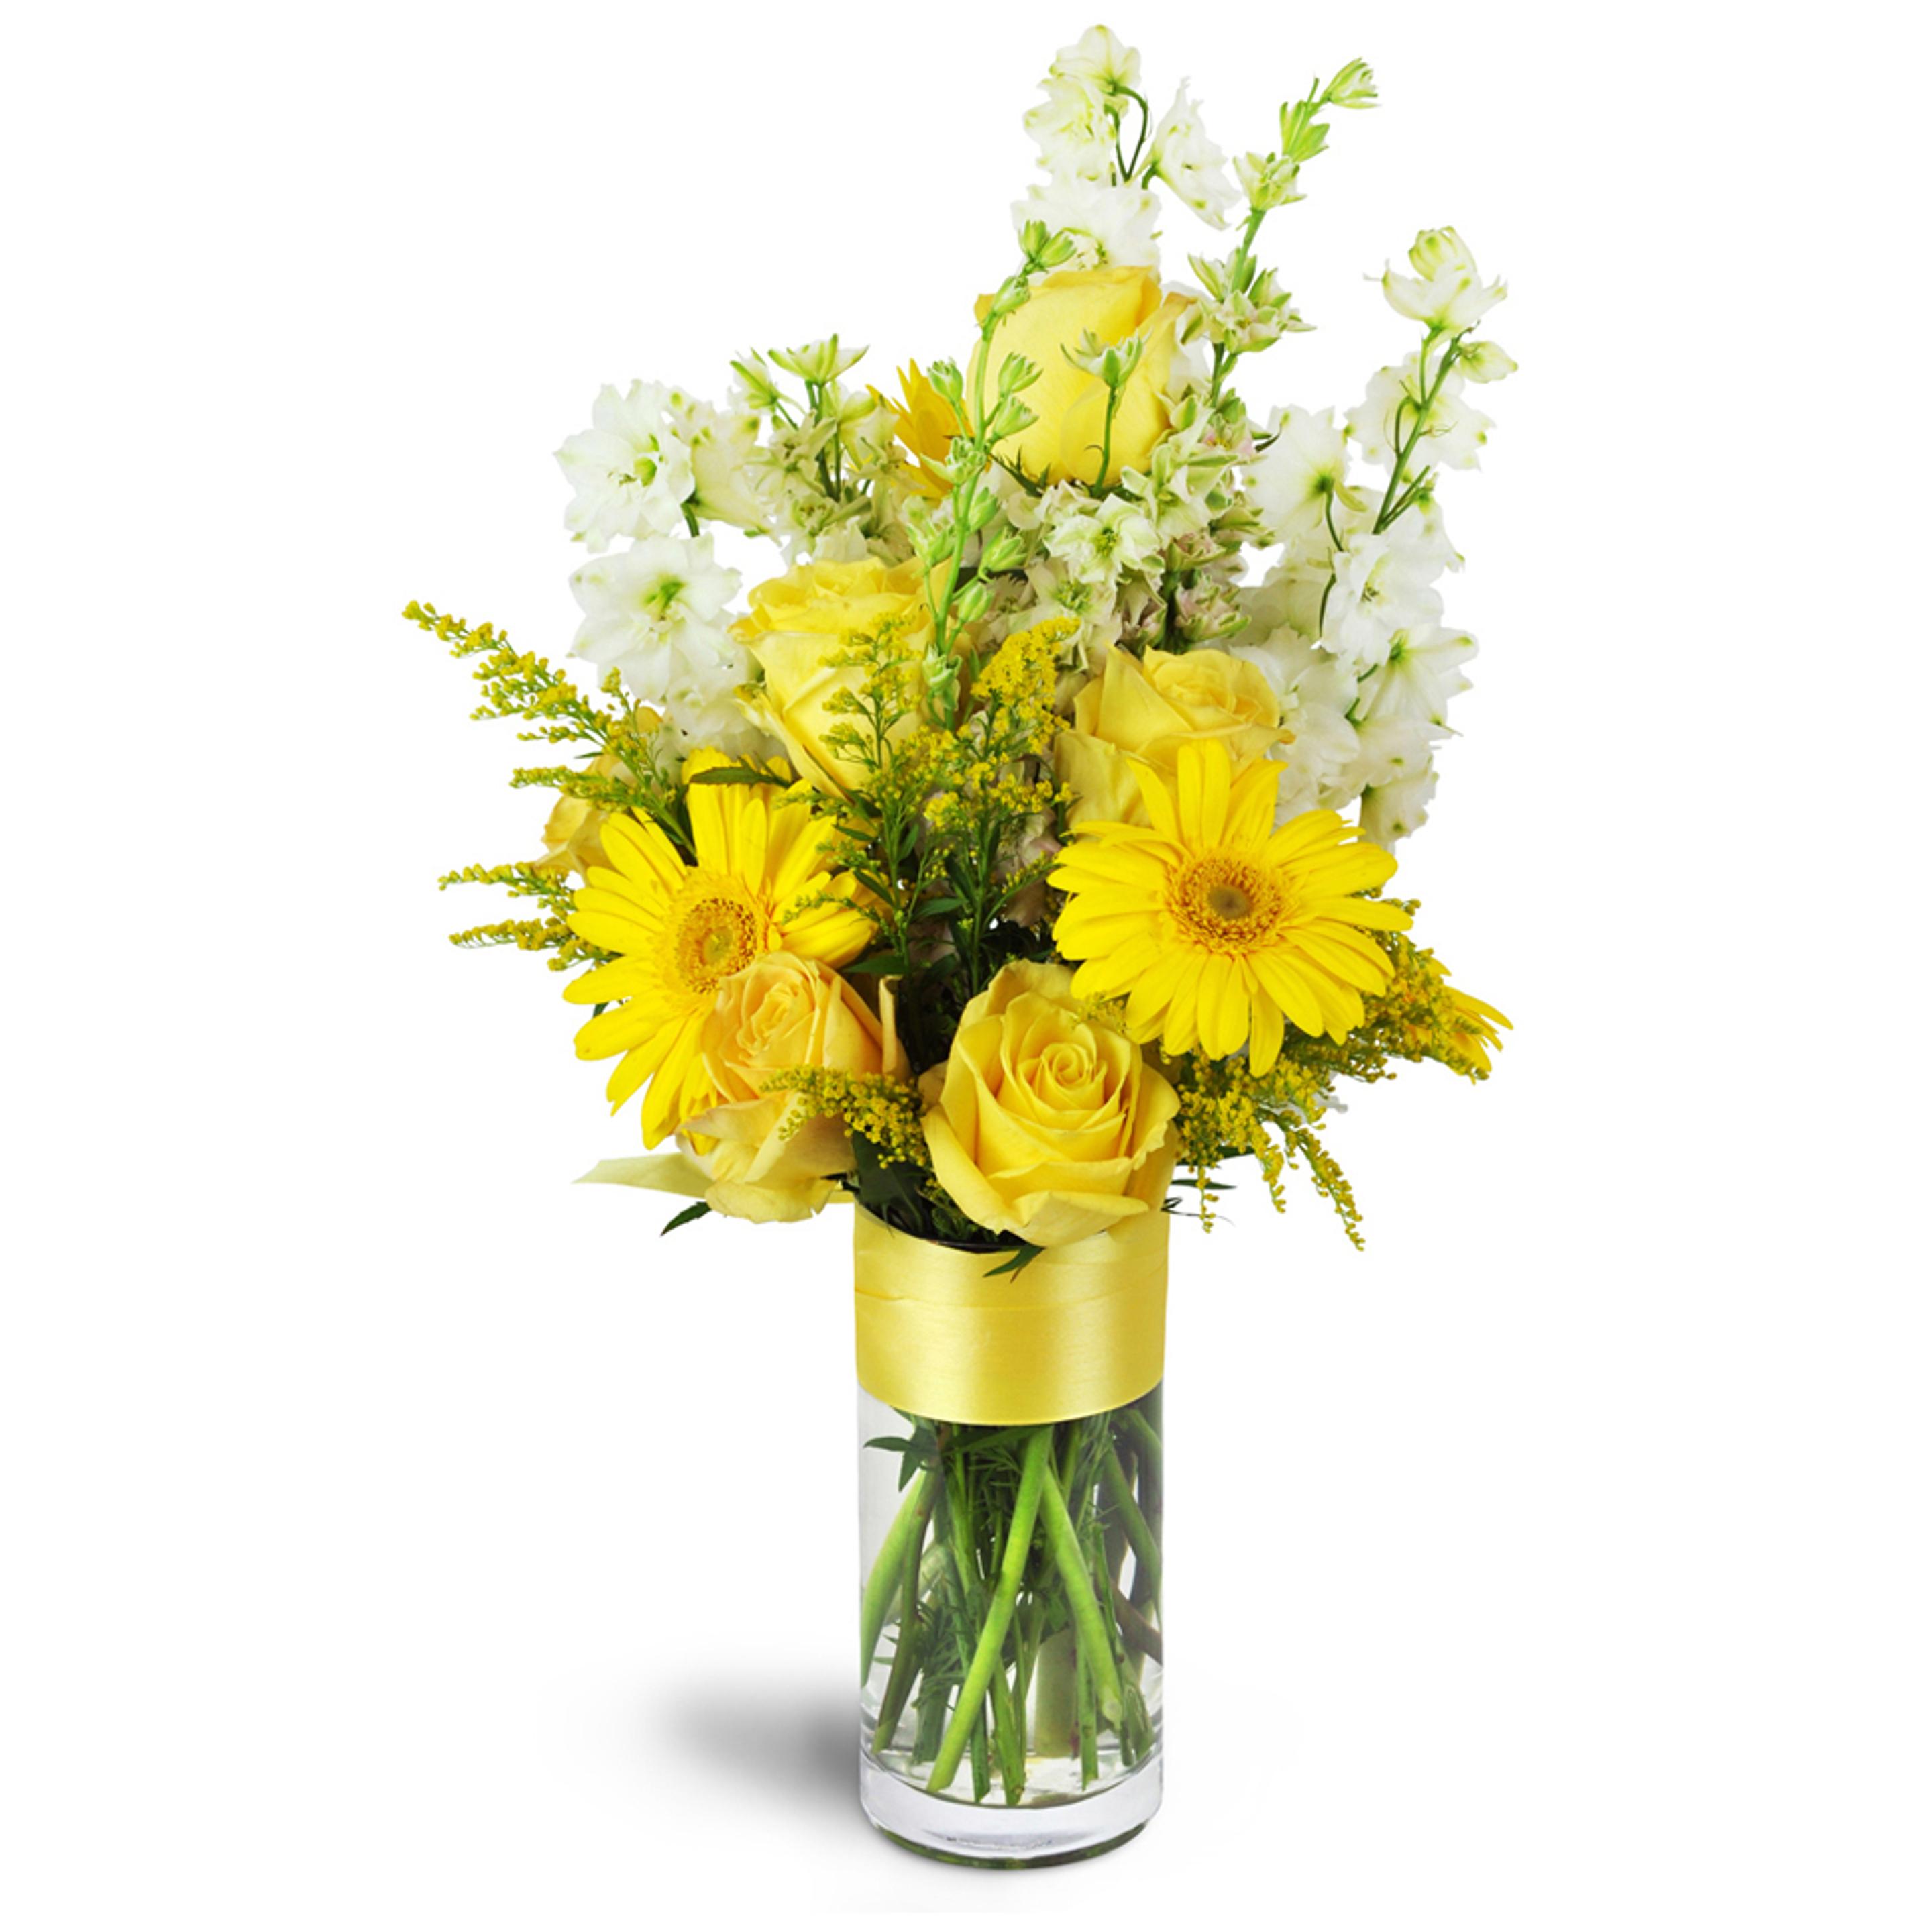 Bright and sunny arrangement perfect for a coworker's birthday